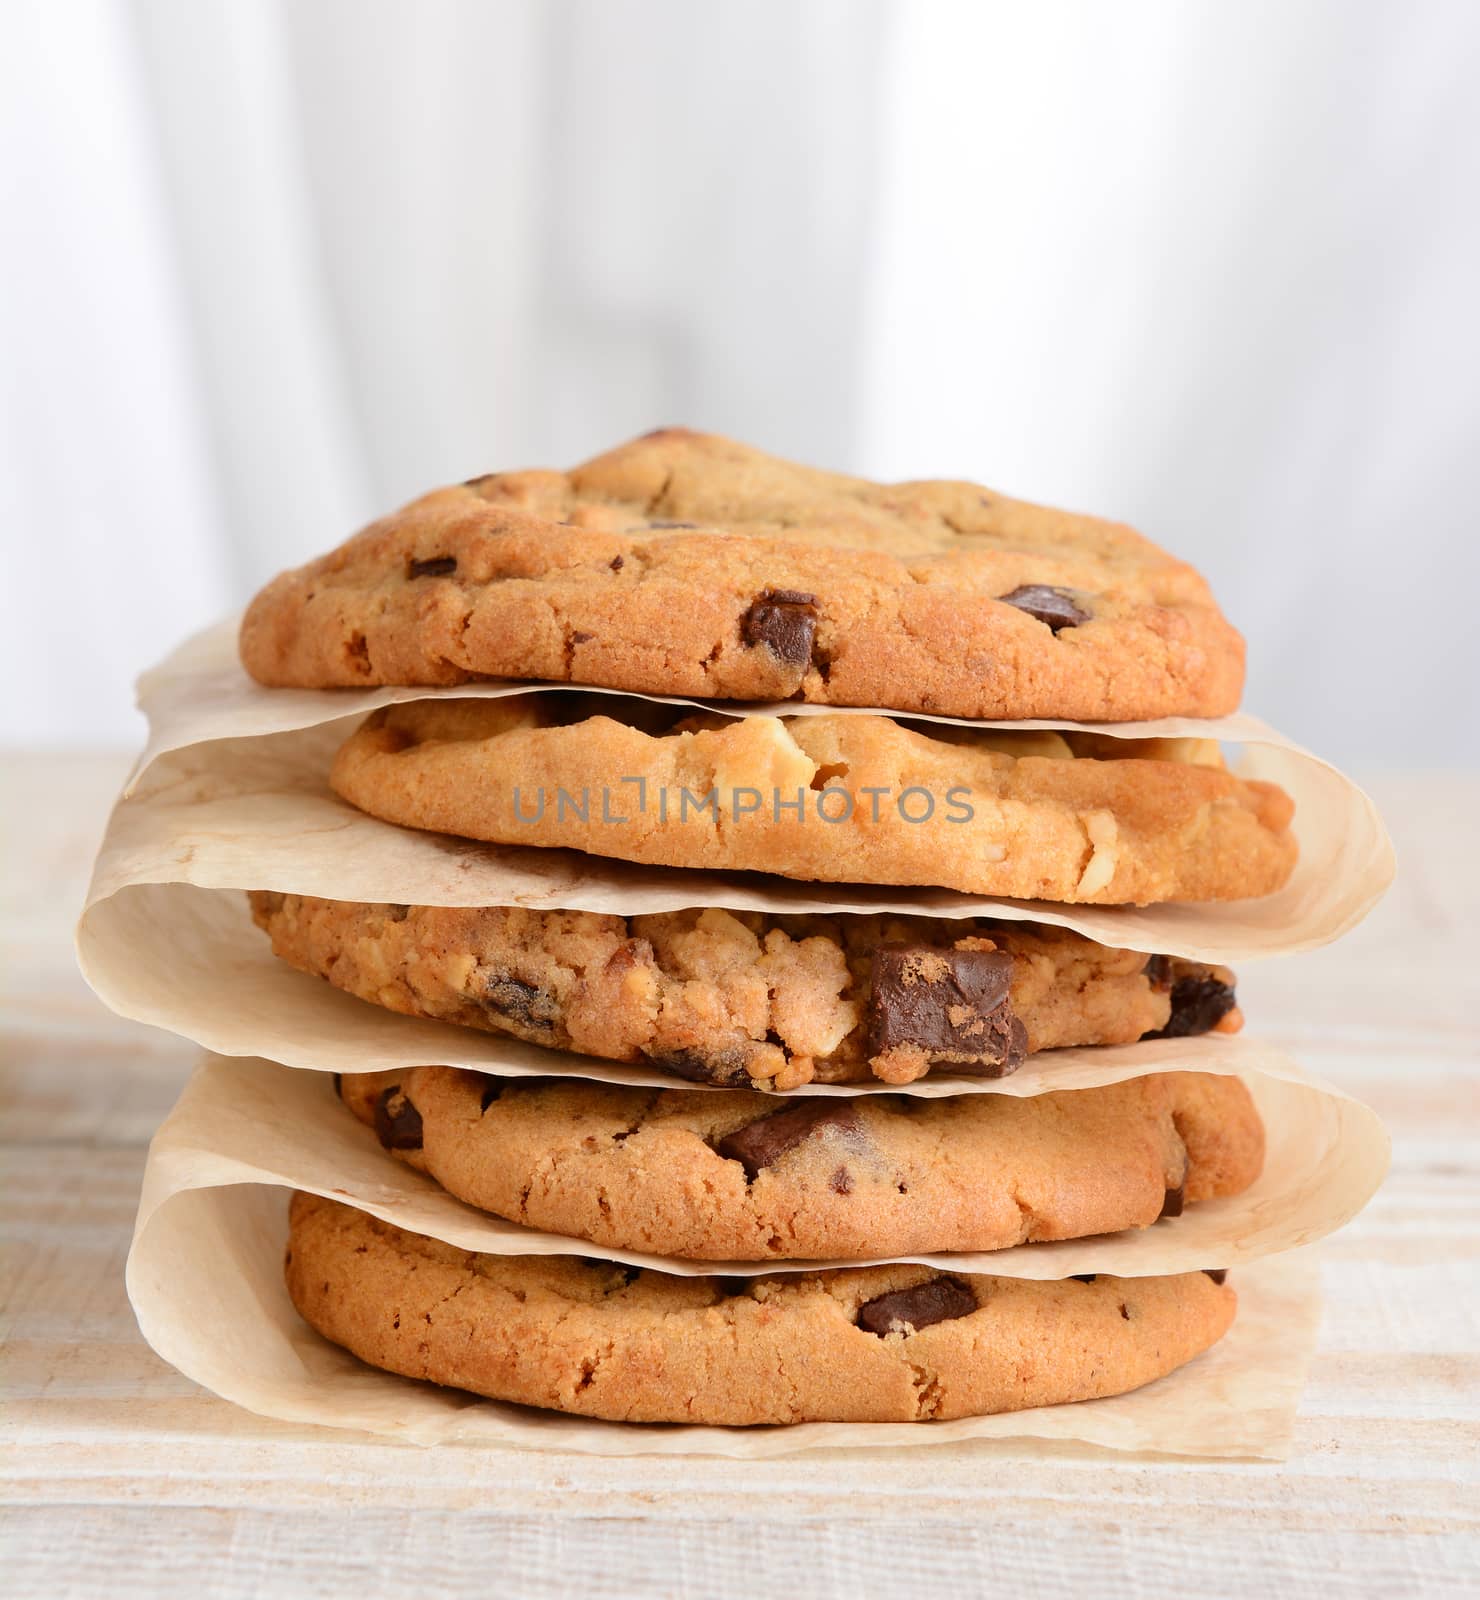 Closeup of a stack of fresh baked cookies Chocolate Chip, Oatmeal Raisin, White Chocolate Chip cookies on parchment paper.
Square format on a rustic white kitchen table.